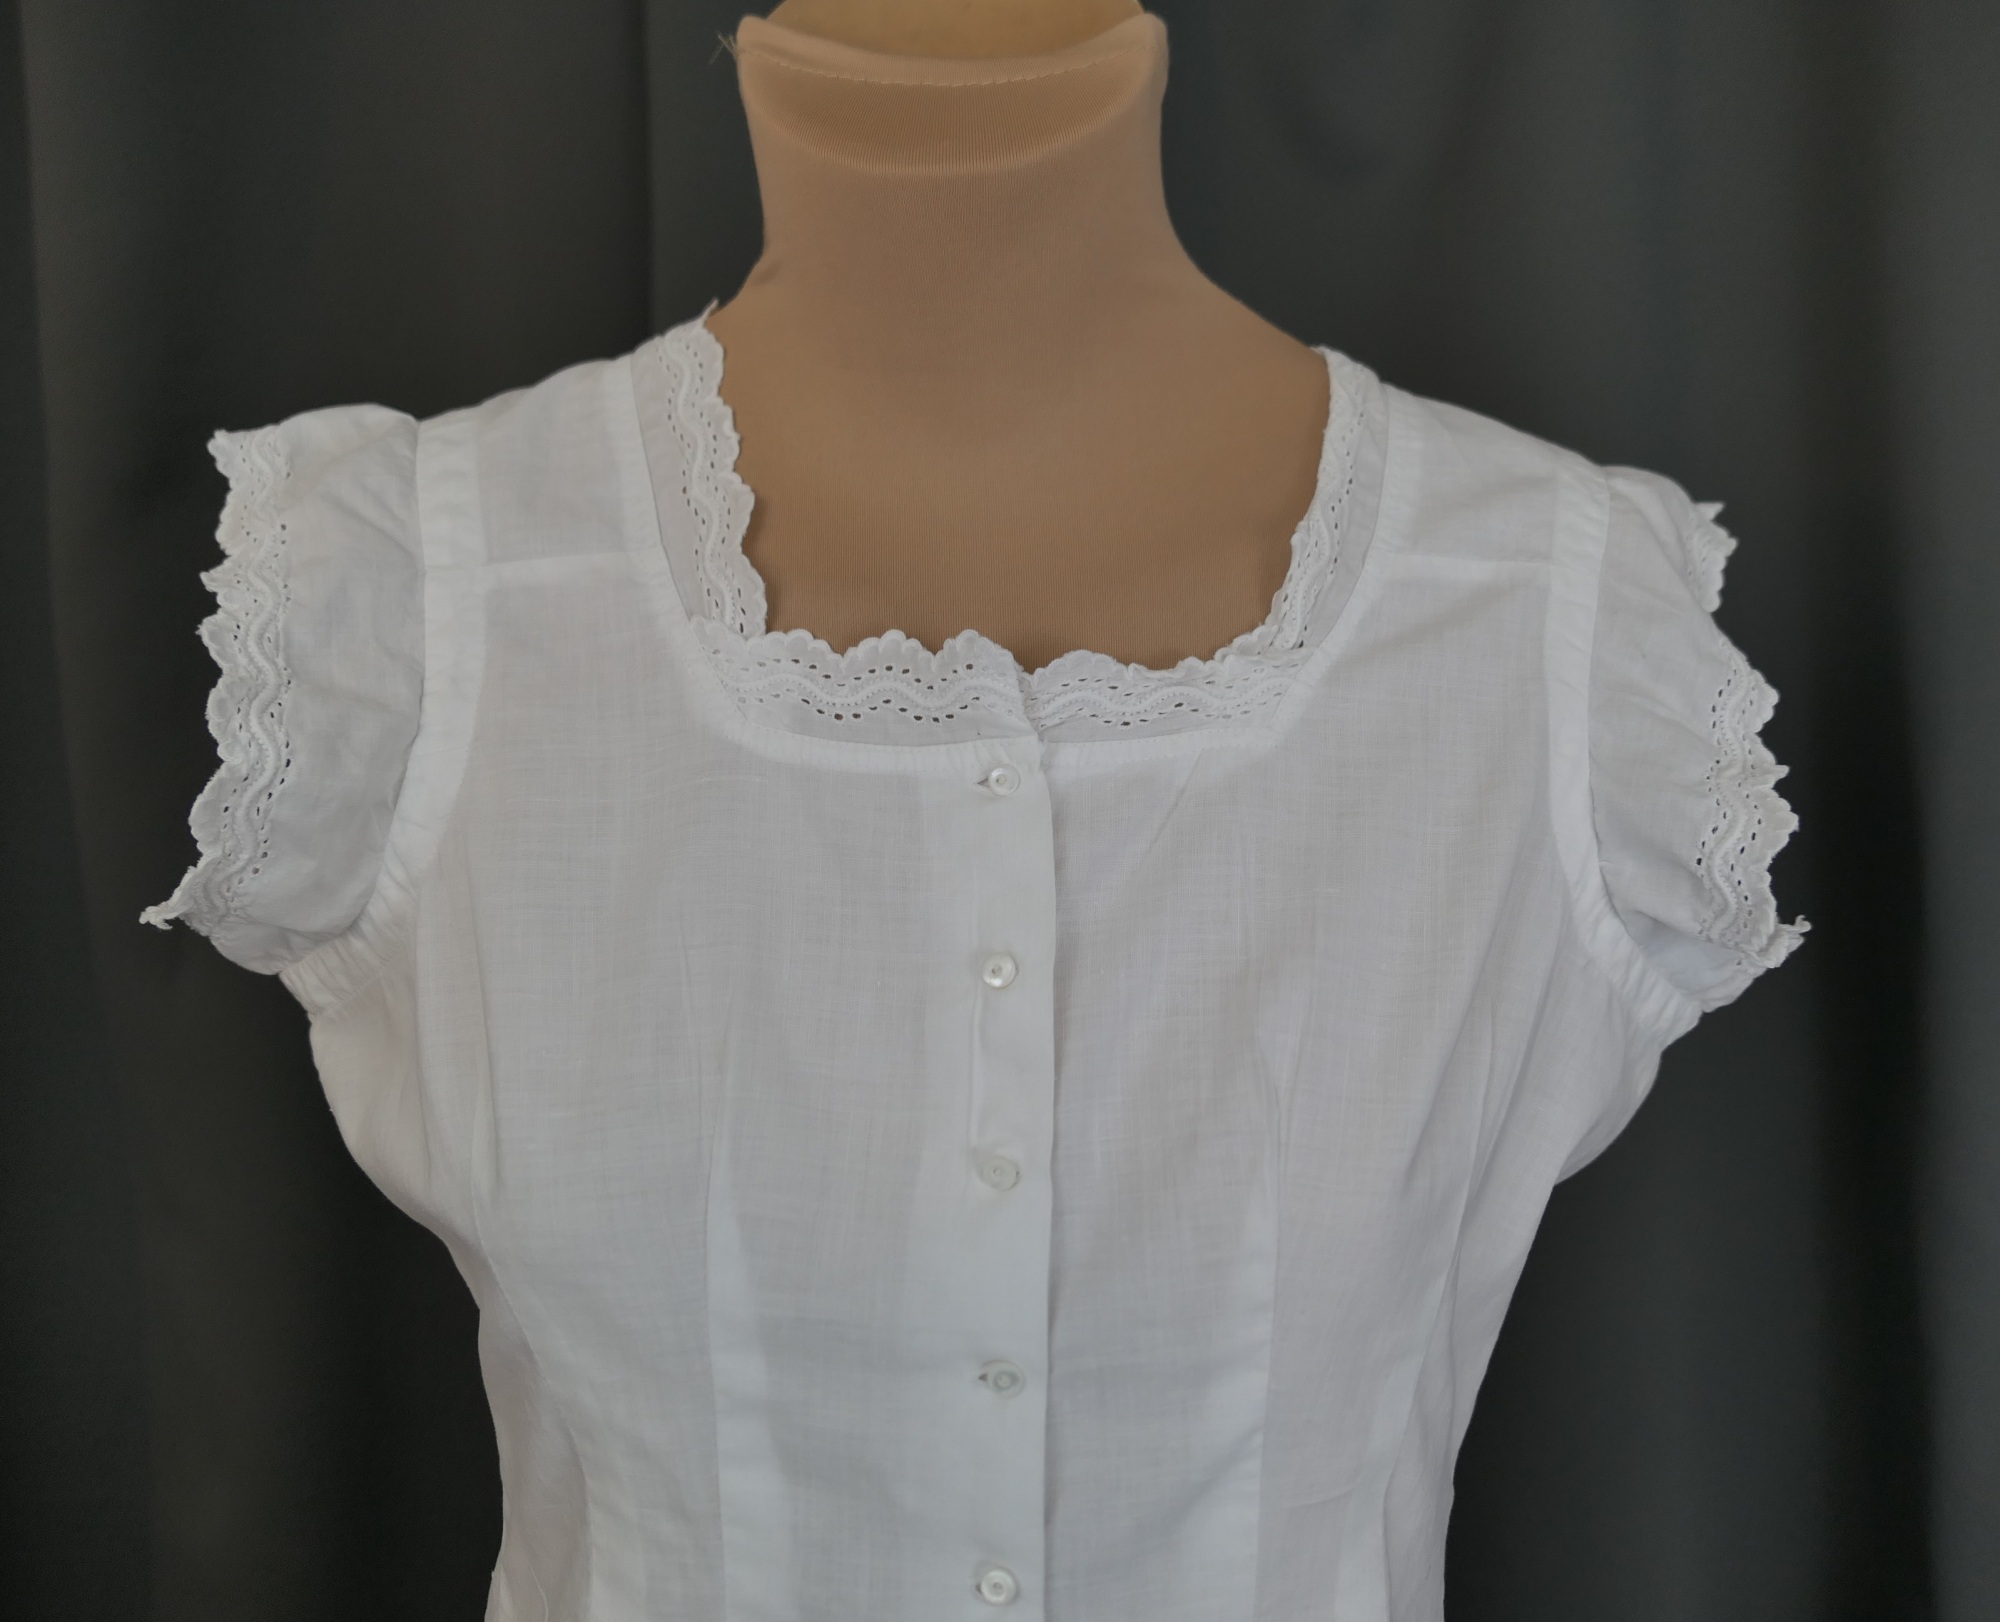 Vintage White Cotton Camisole Corset Cover, Victorian 1800s, 35 inch bust